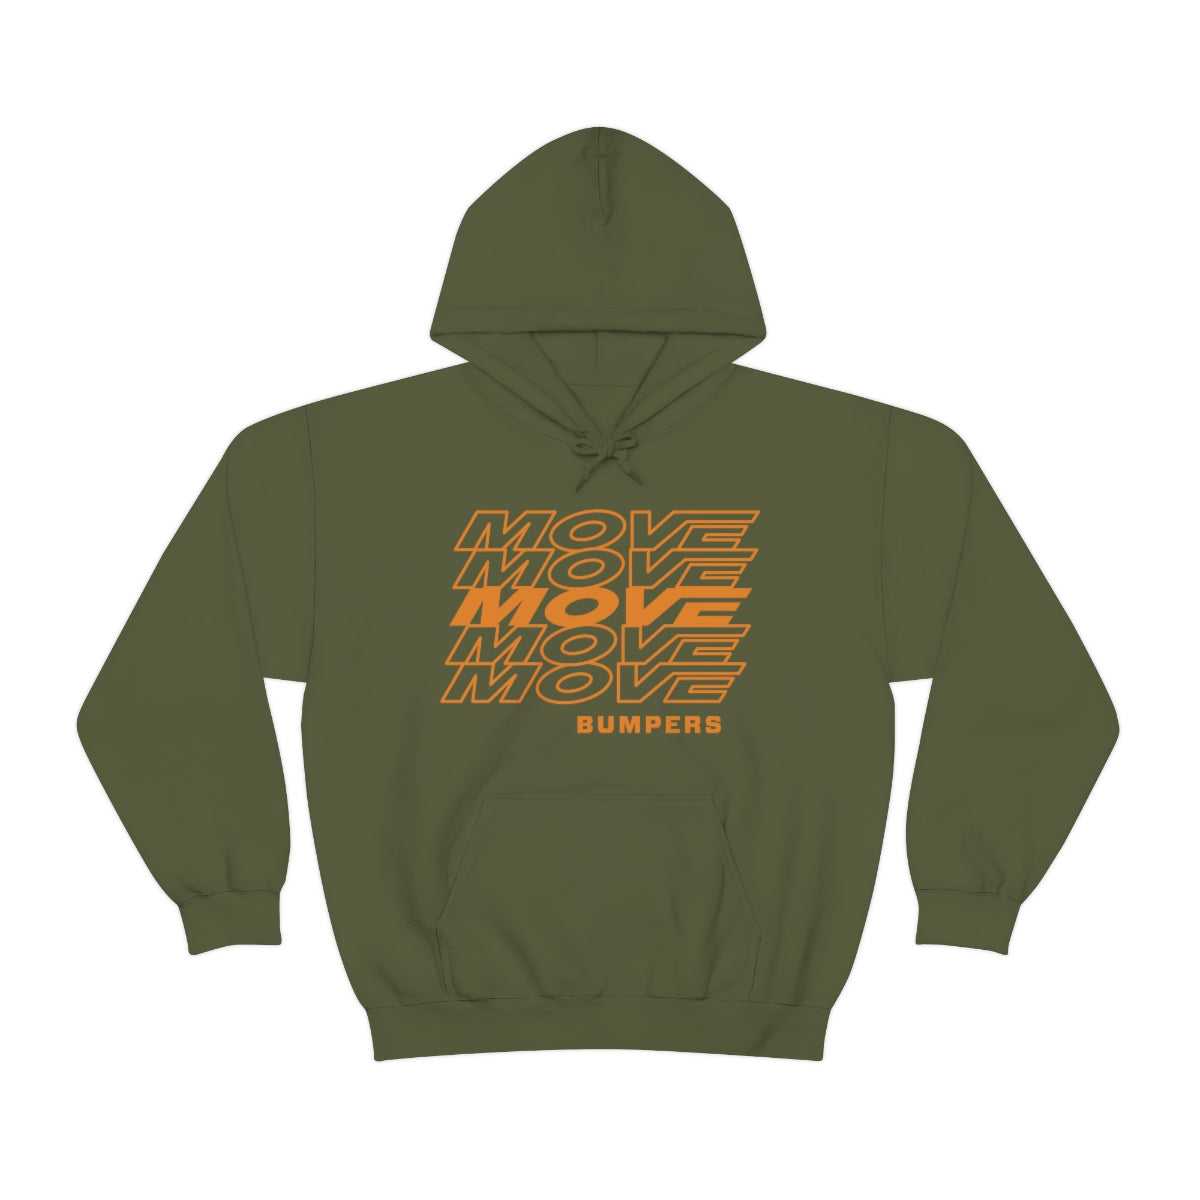 MOVE - MOVE Bumpers Hoodie - Military Green